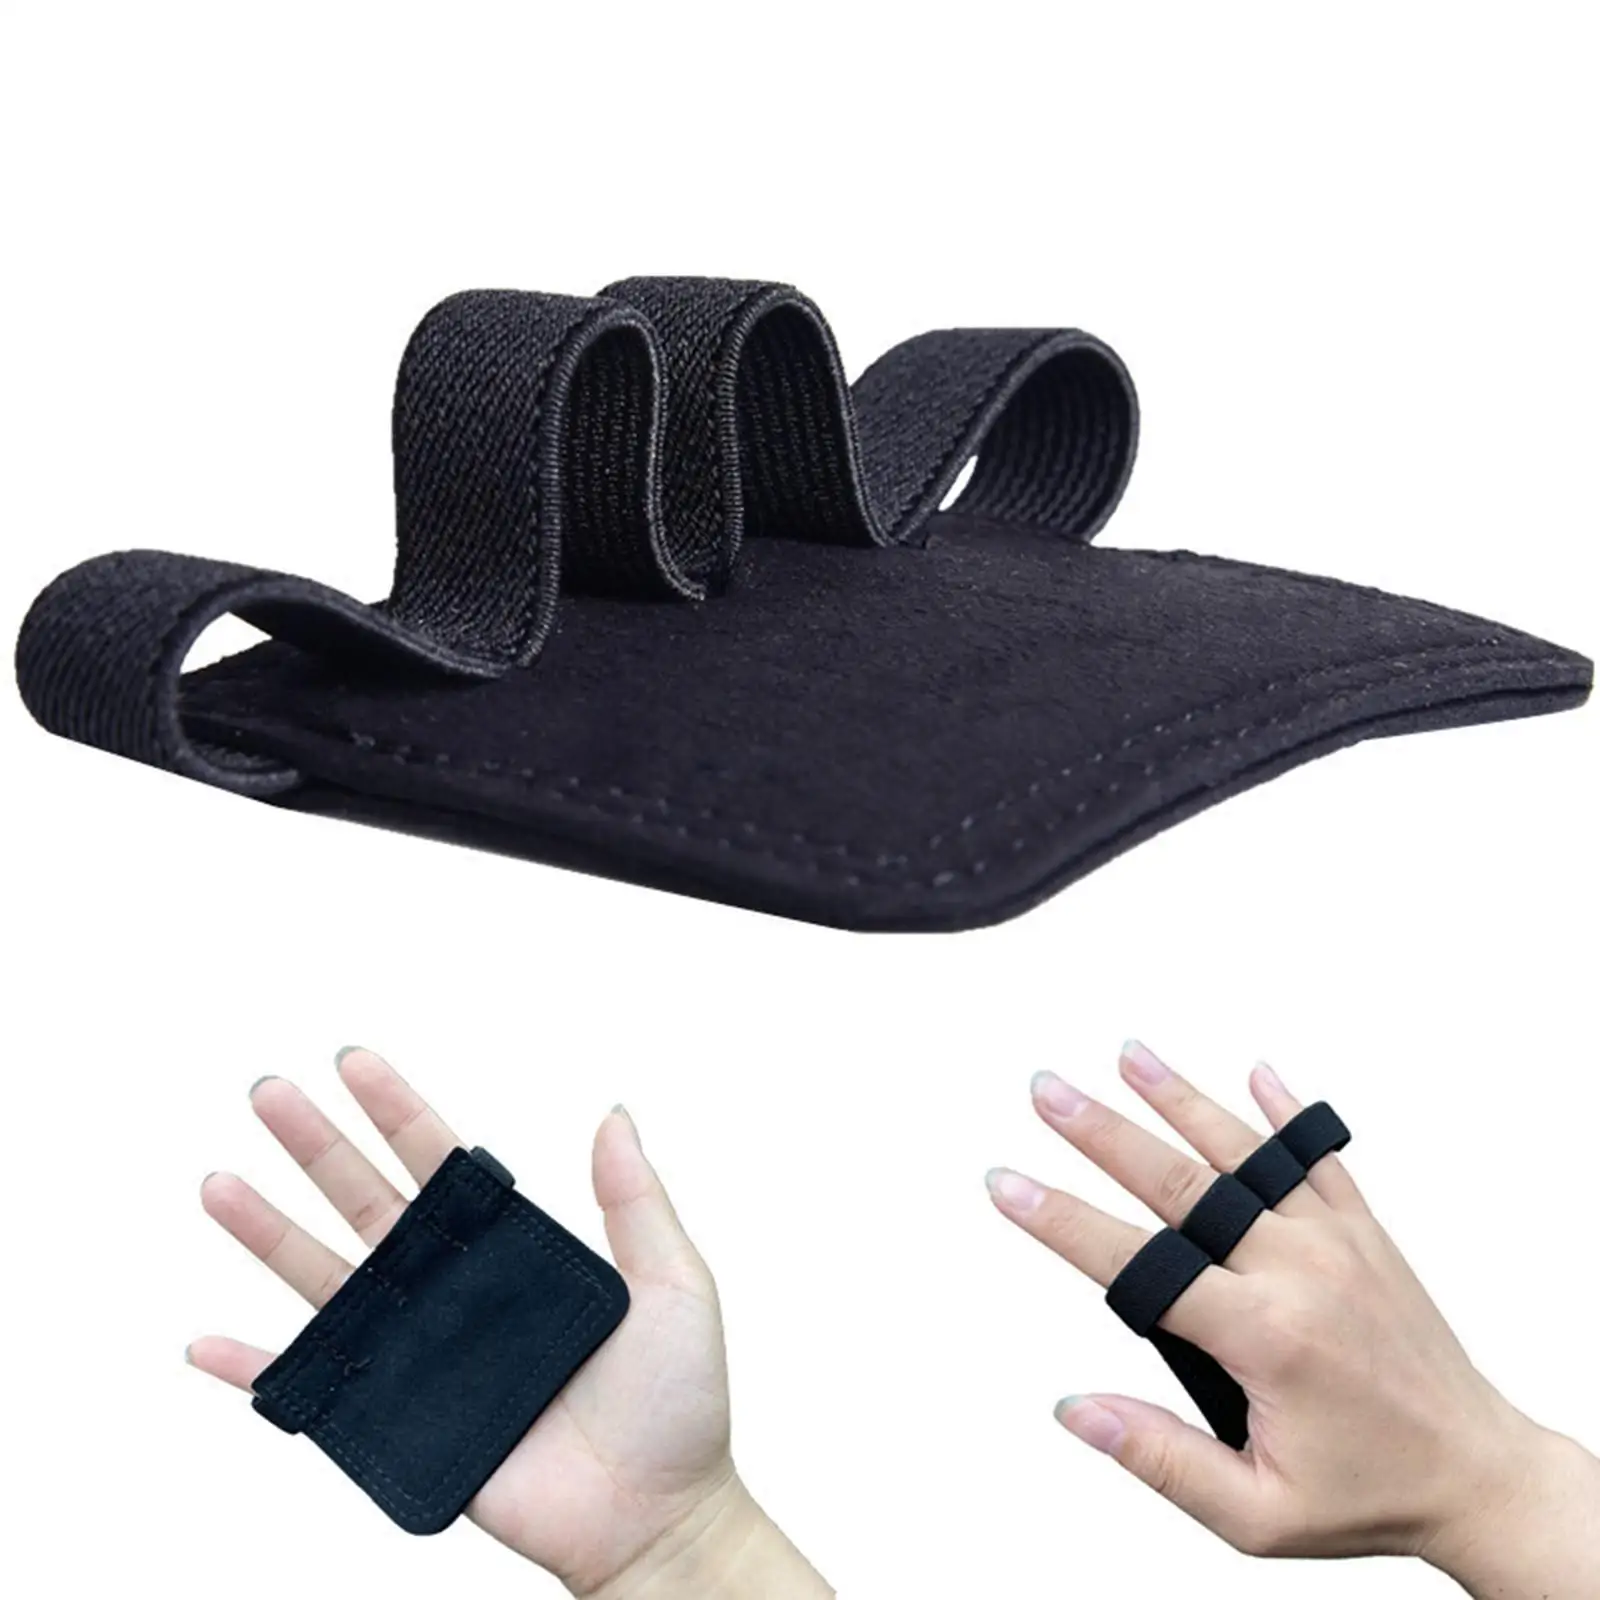 Square  Workout Gloves Lifting Grips for Weight Lifting Training Gym